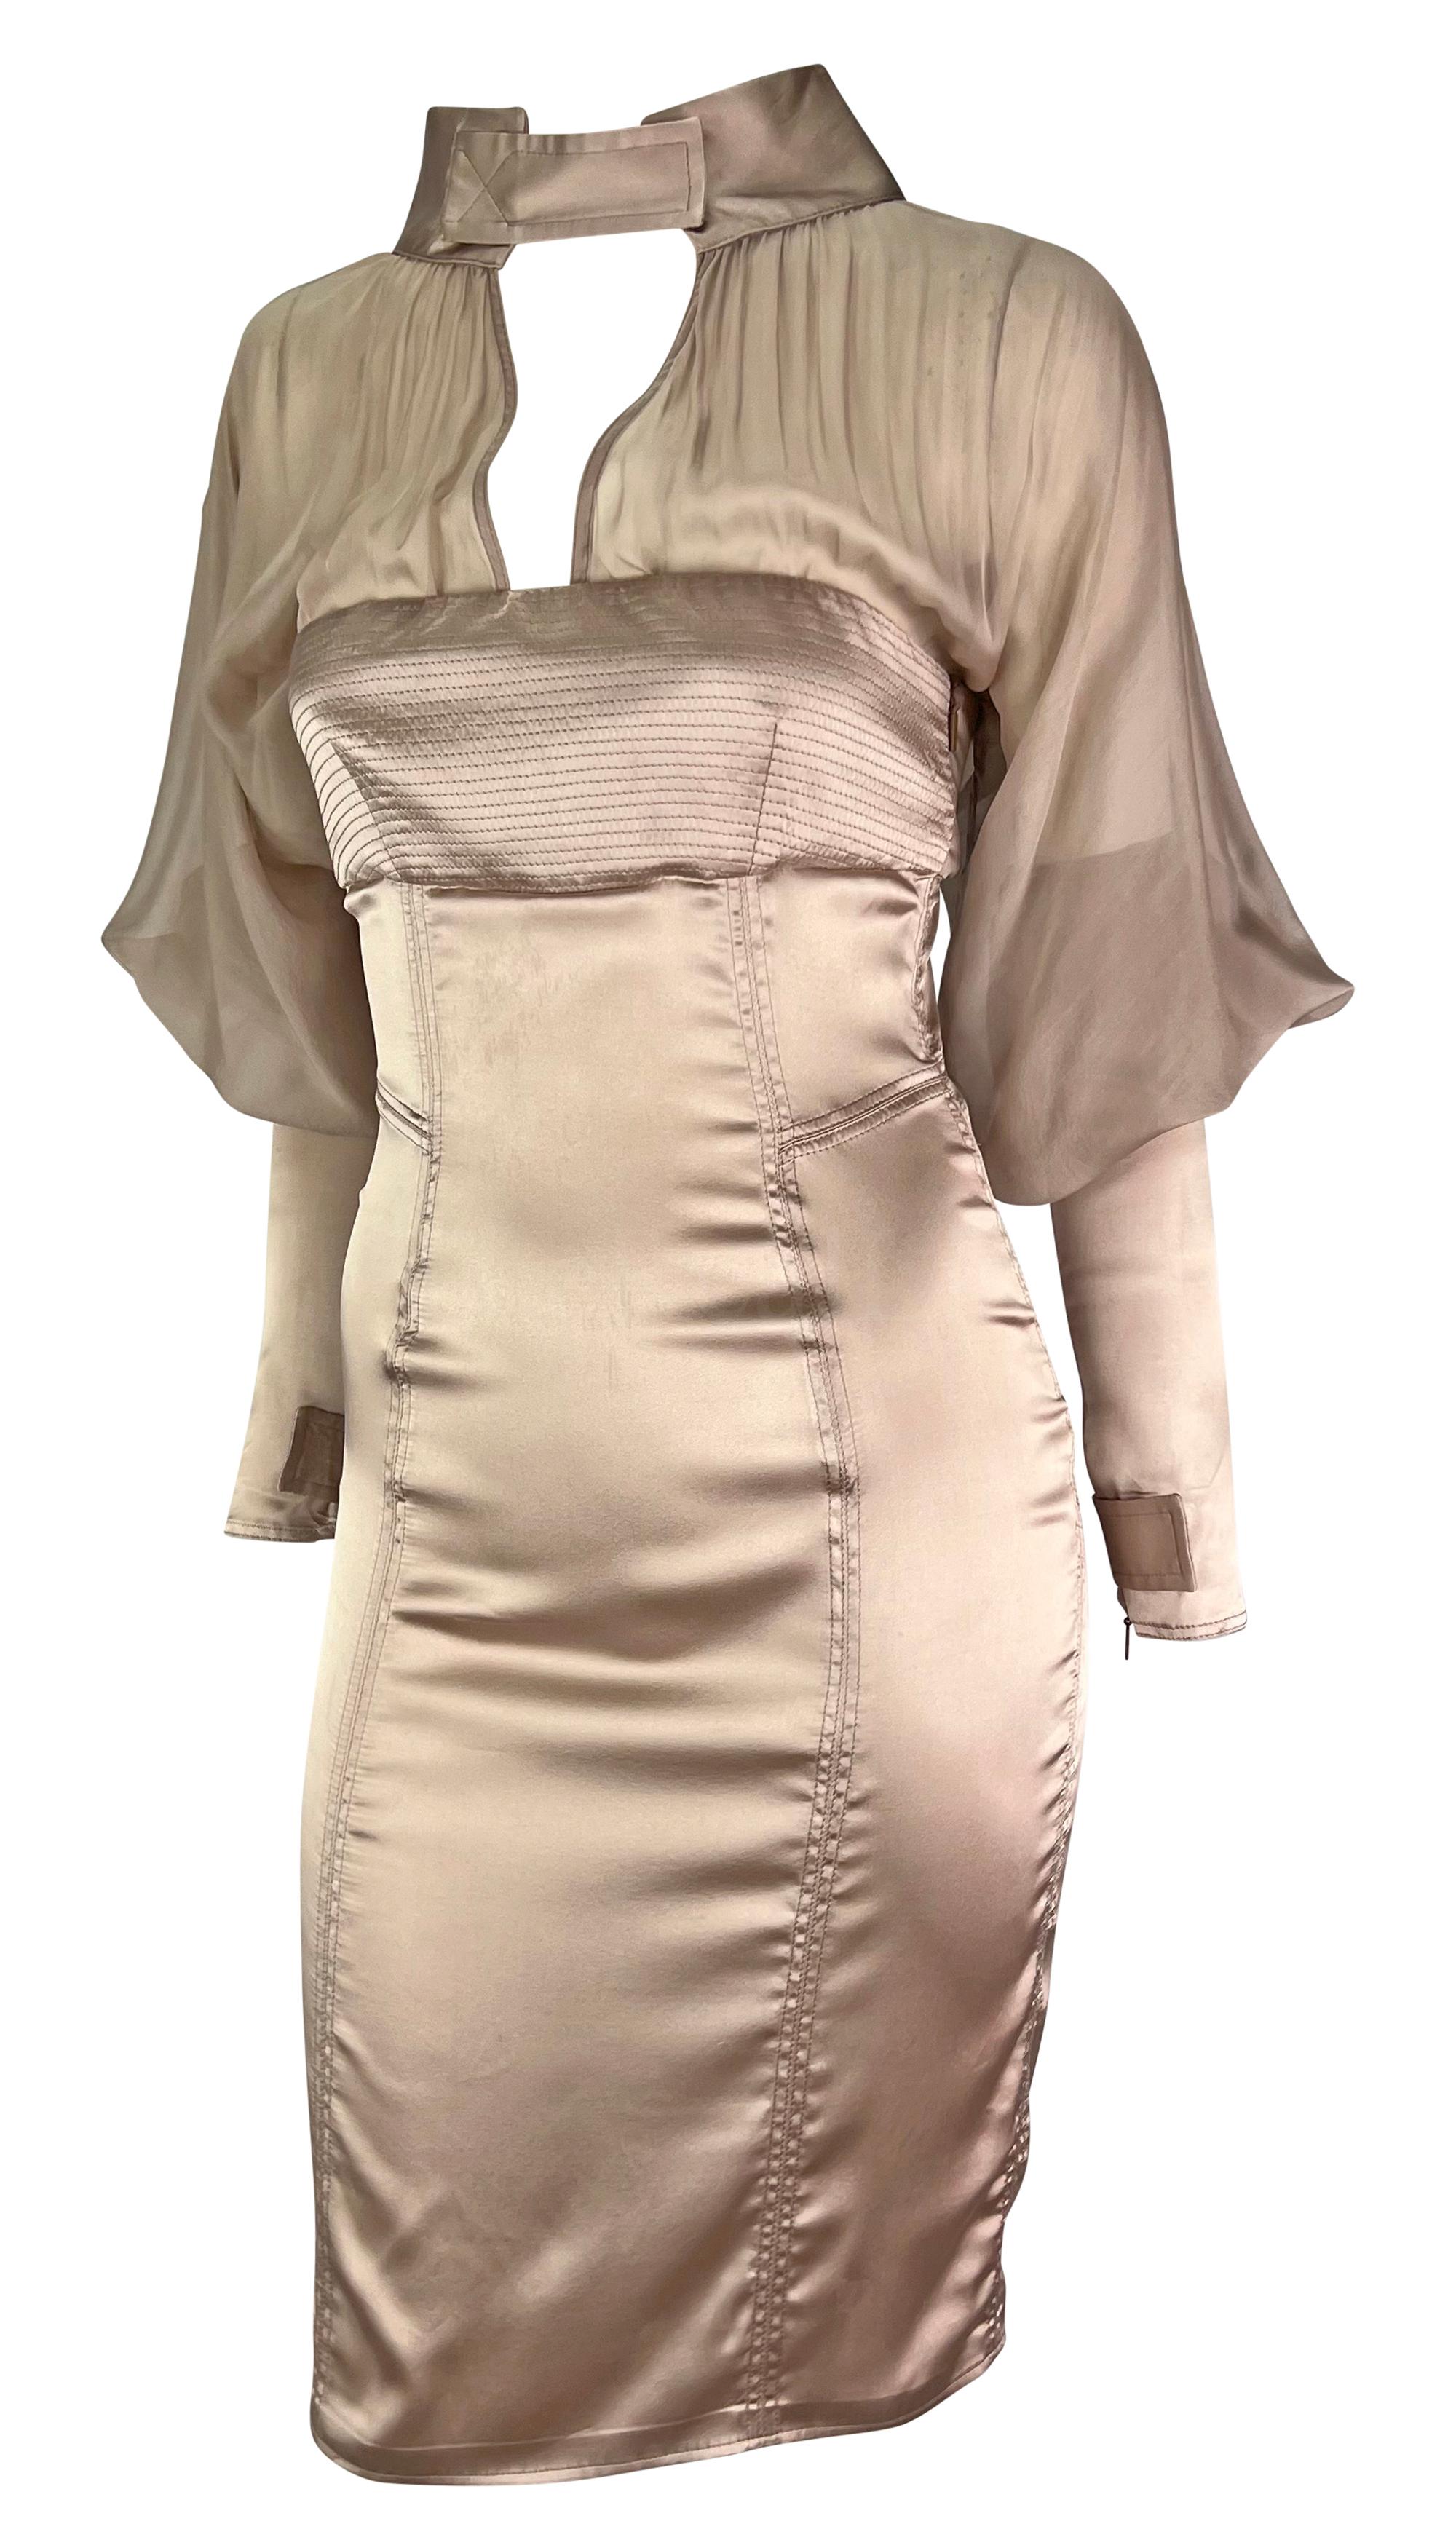 F/W 2003 Gucci by Tom Ford Runway Dusty Pink Silk Satin Mini Dress In Good Condition For Sale In West Hollywood, CA